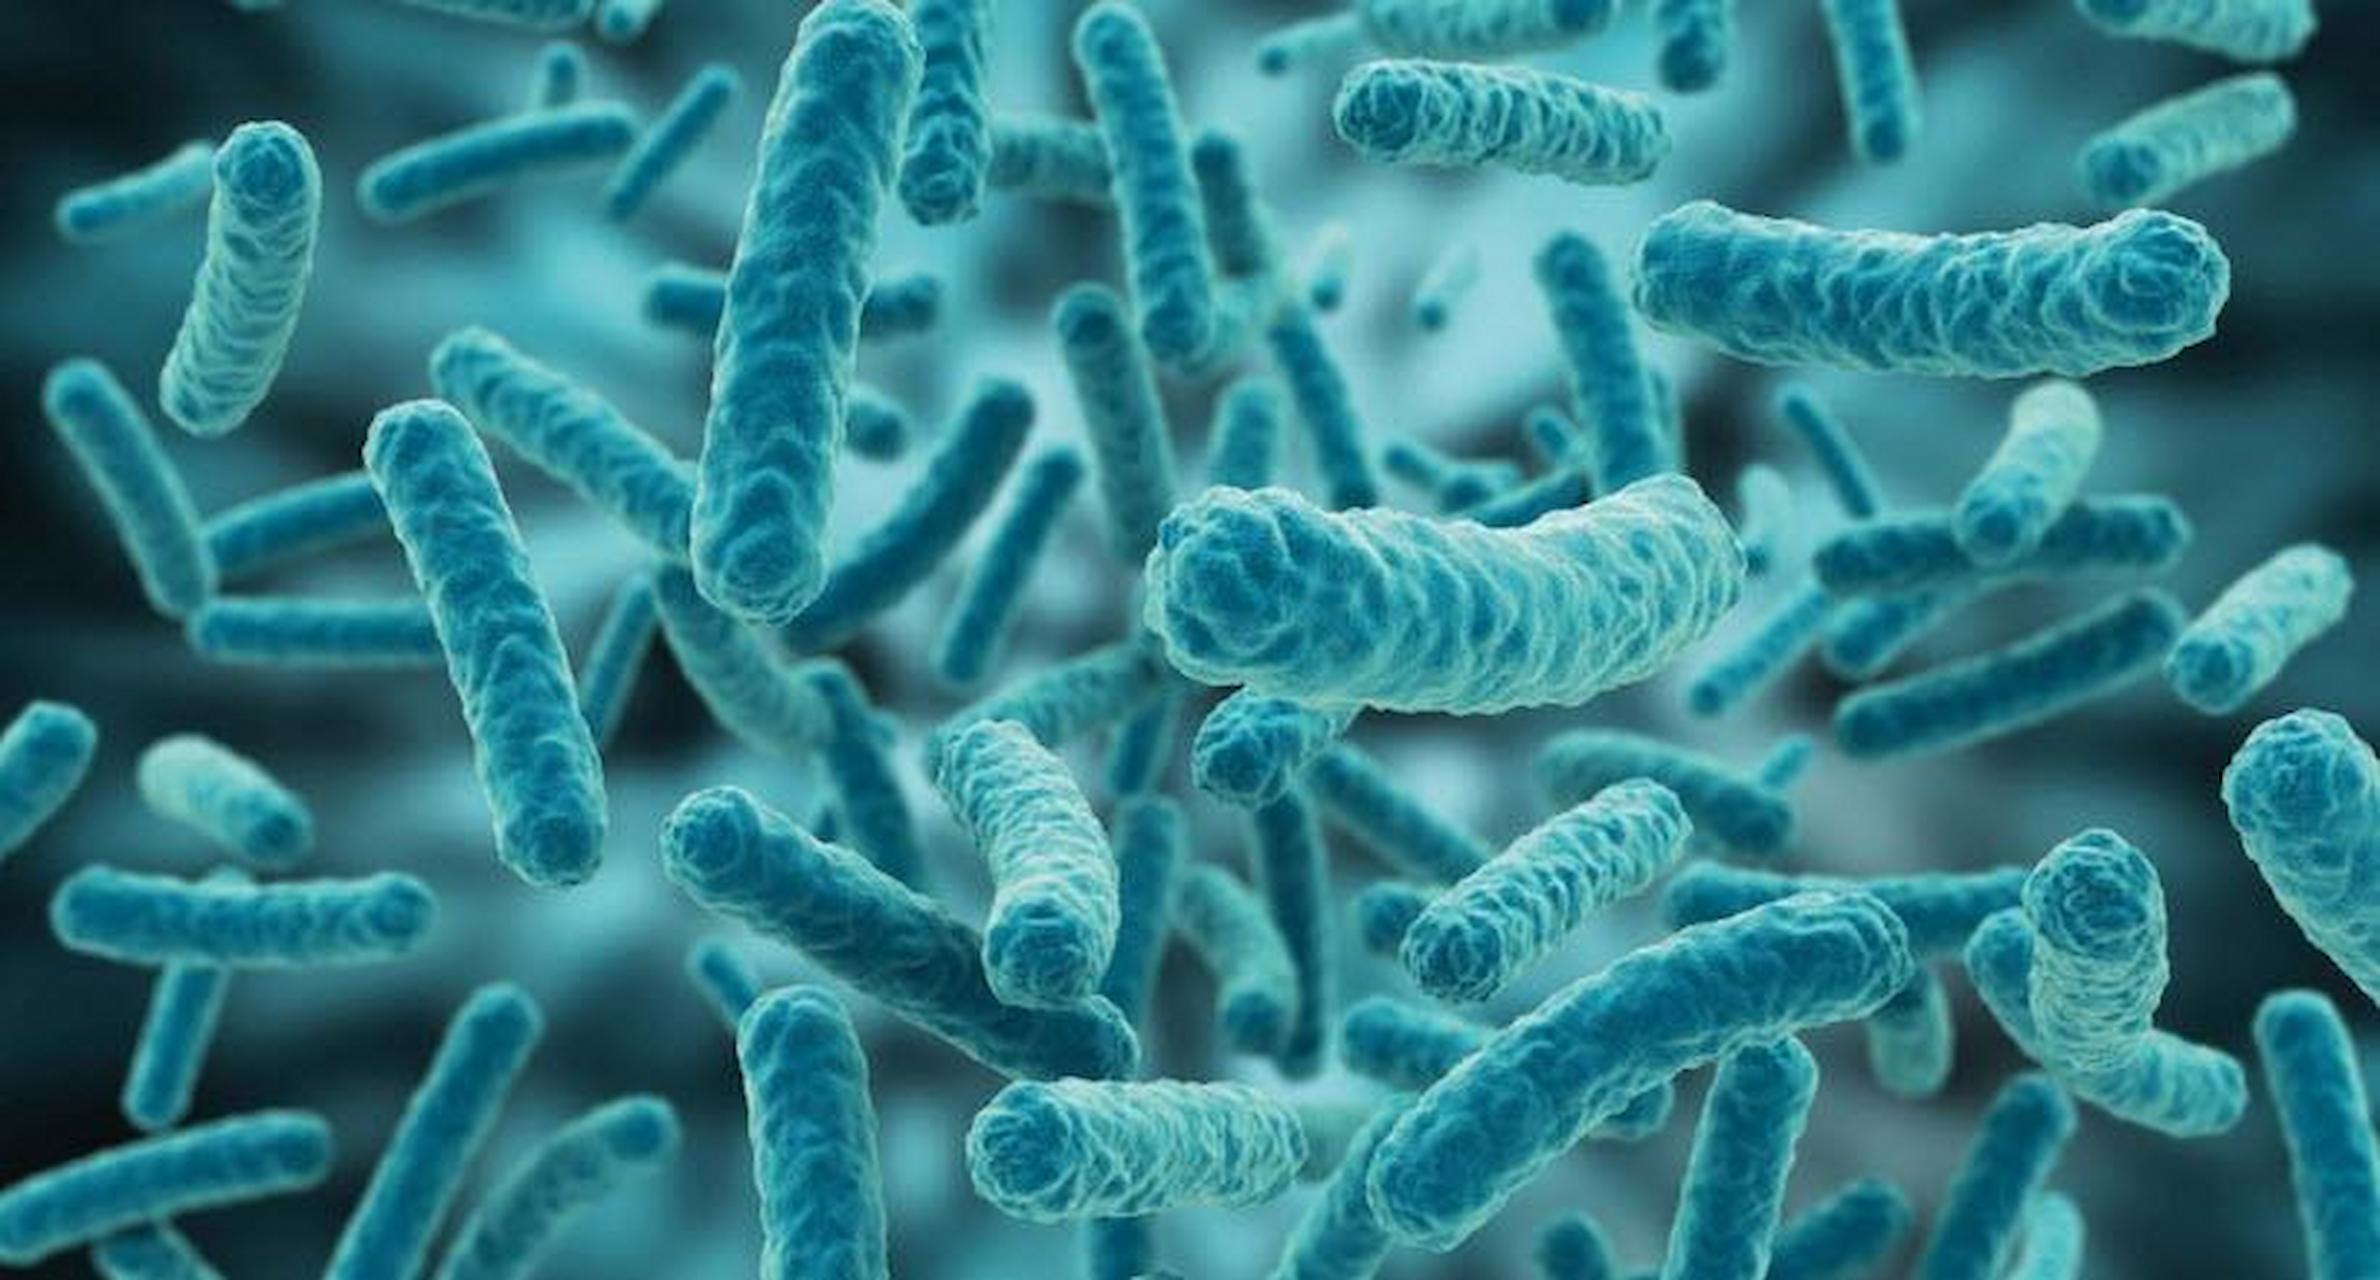 From Where Can You Get The Assessment Done For Legionella Risk?